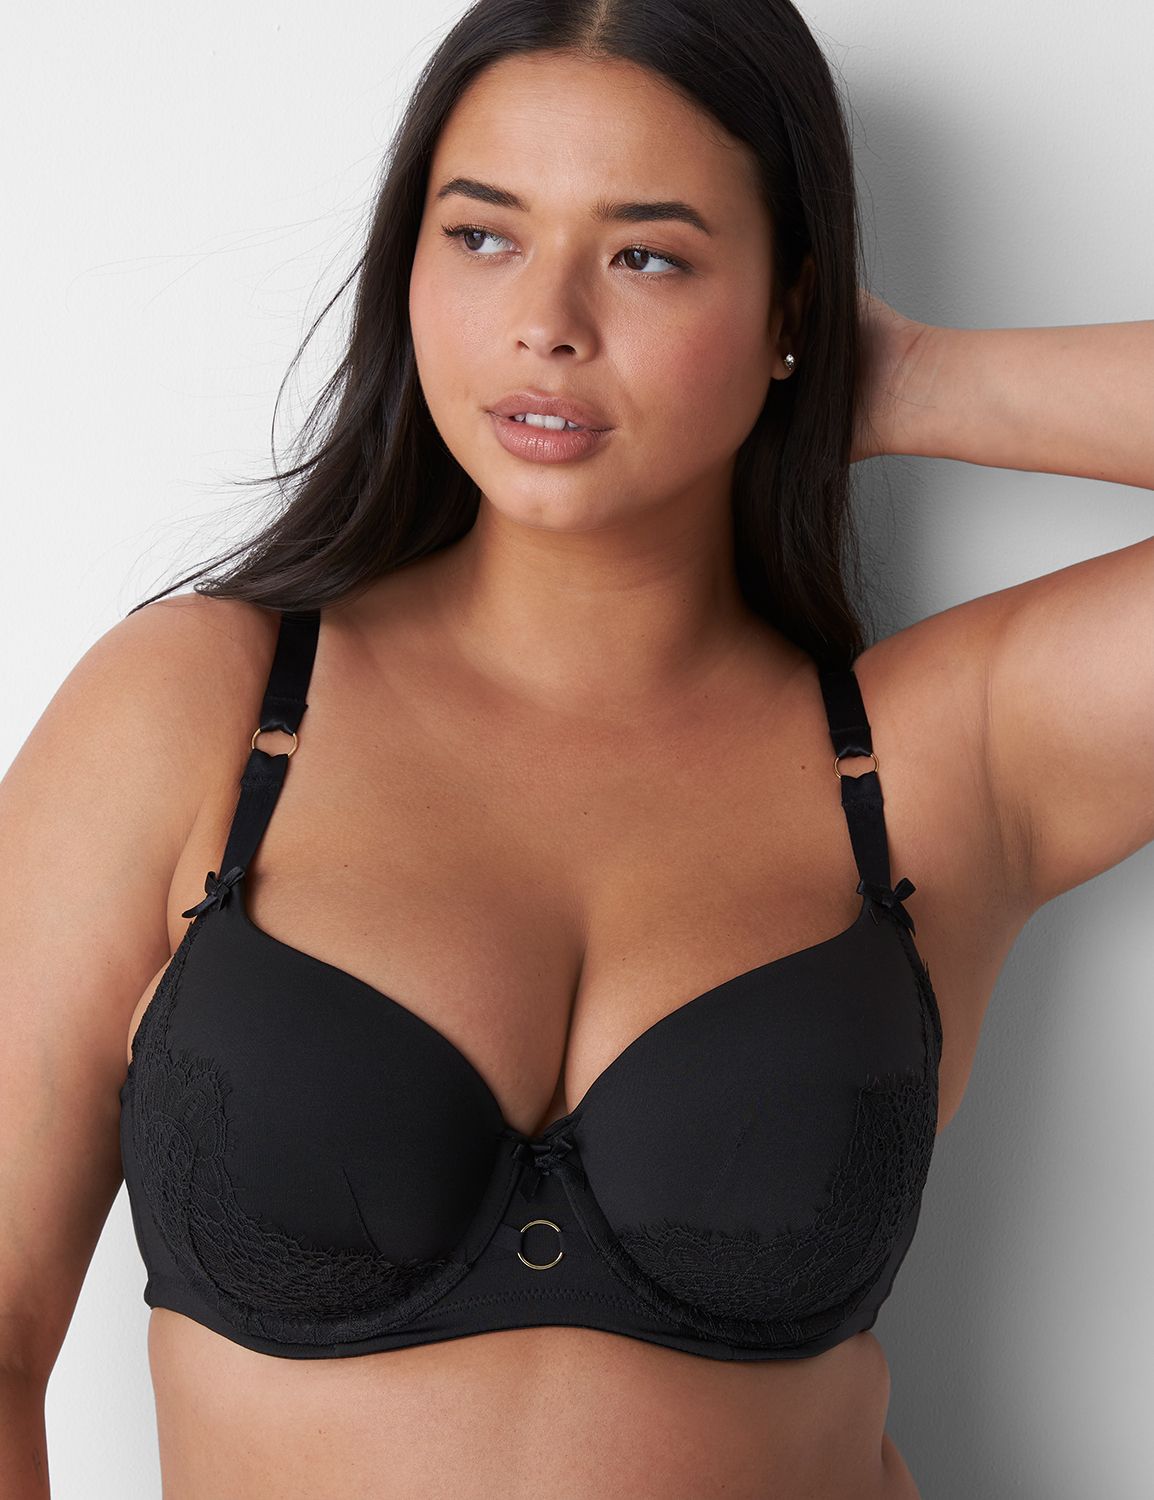 Lane Bryant - Seriously Sexy it up with a $49 bra + panty! 🔥 Shop